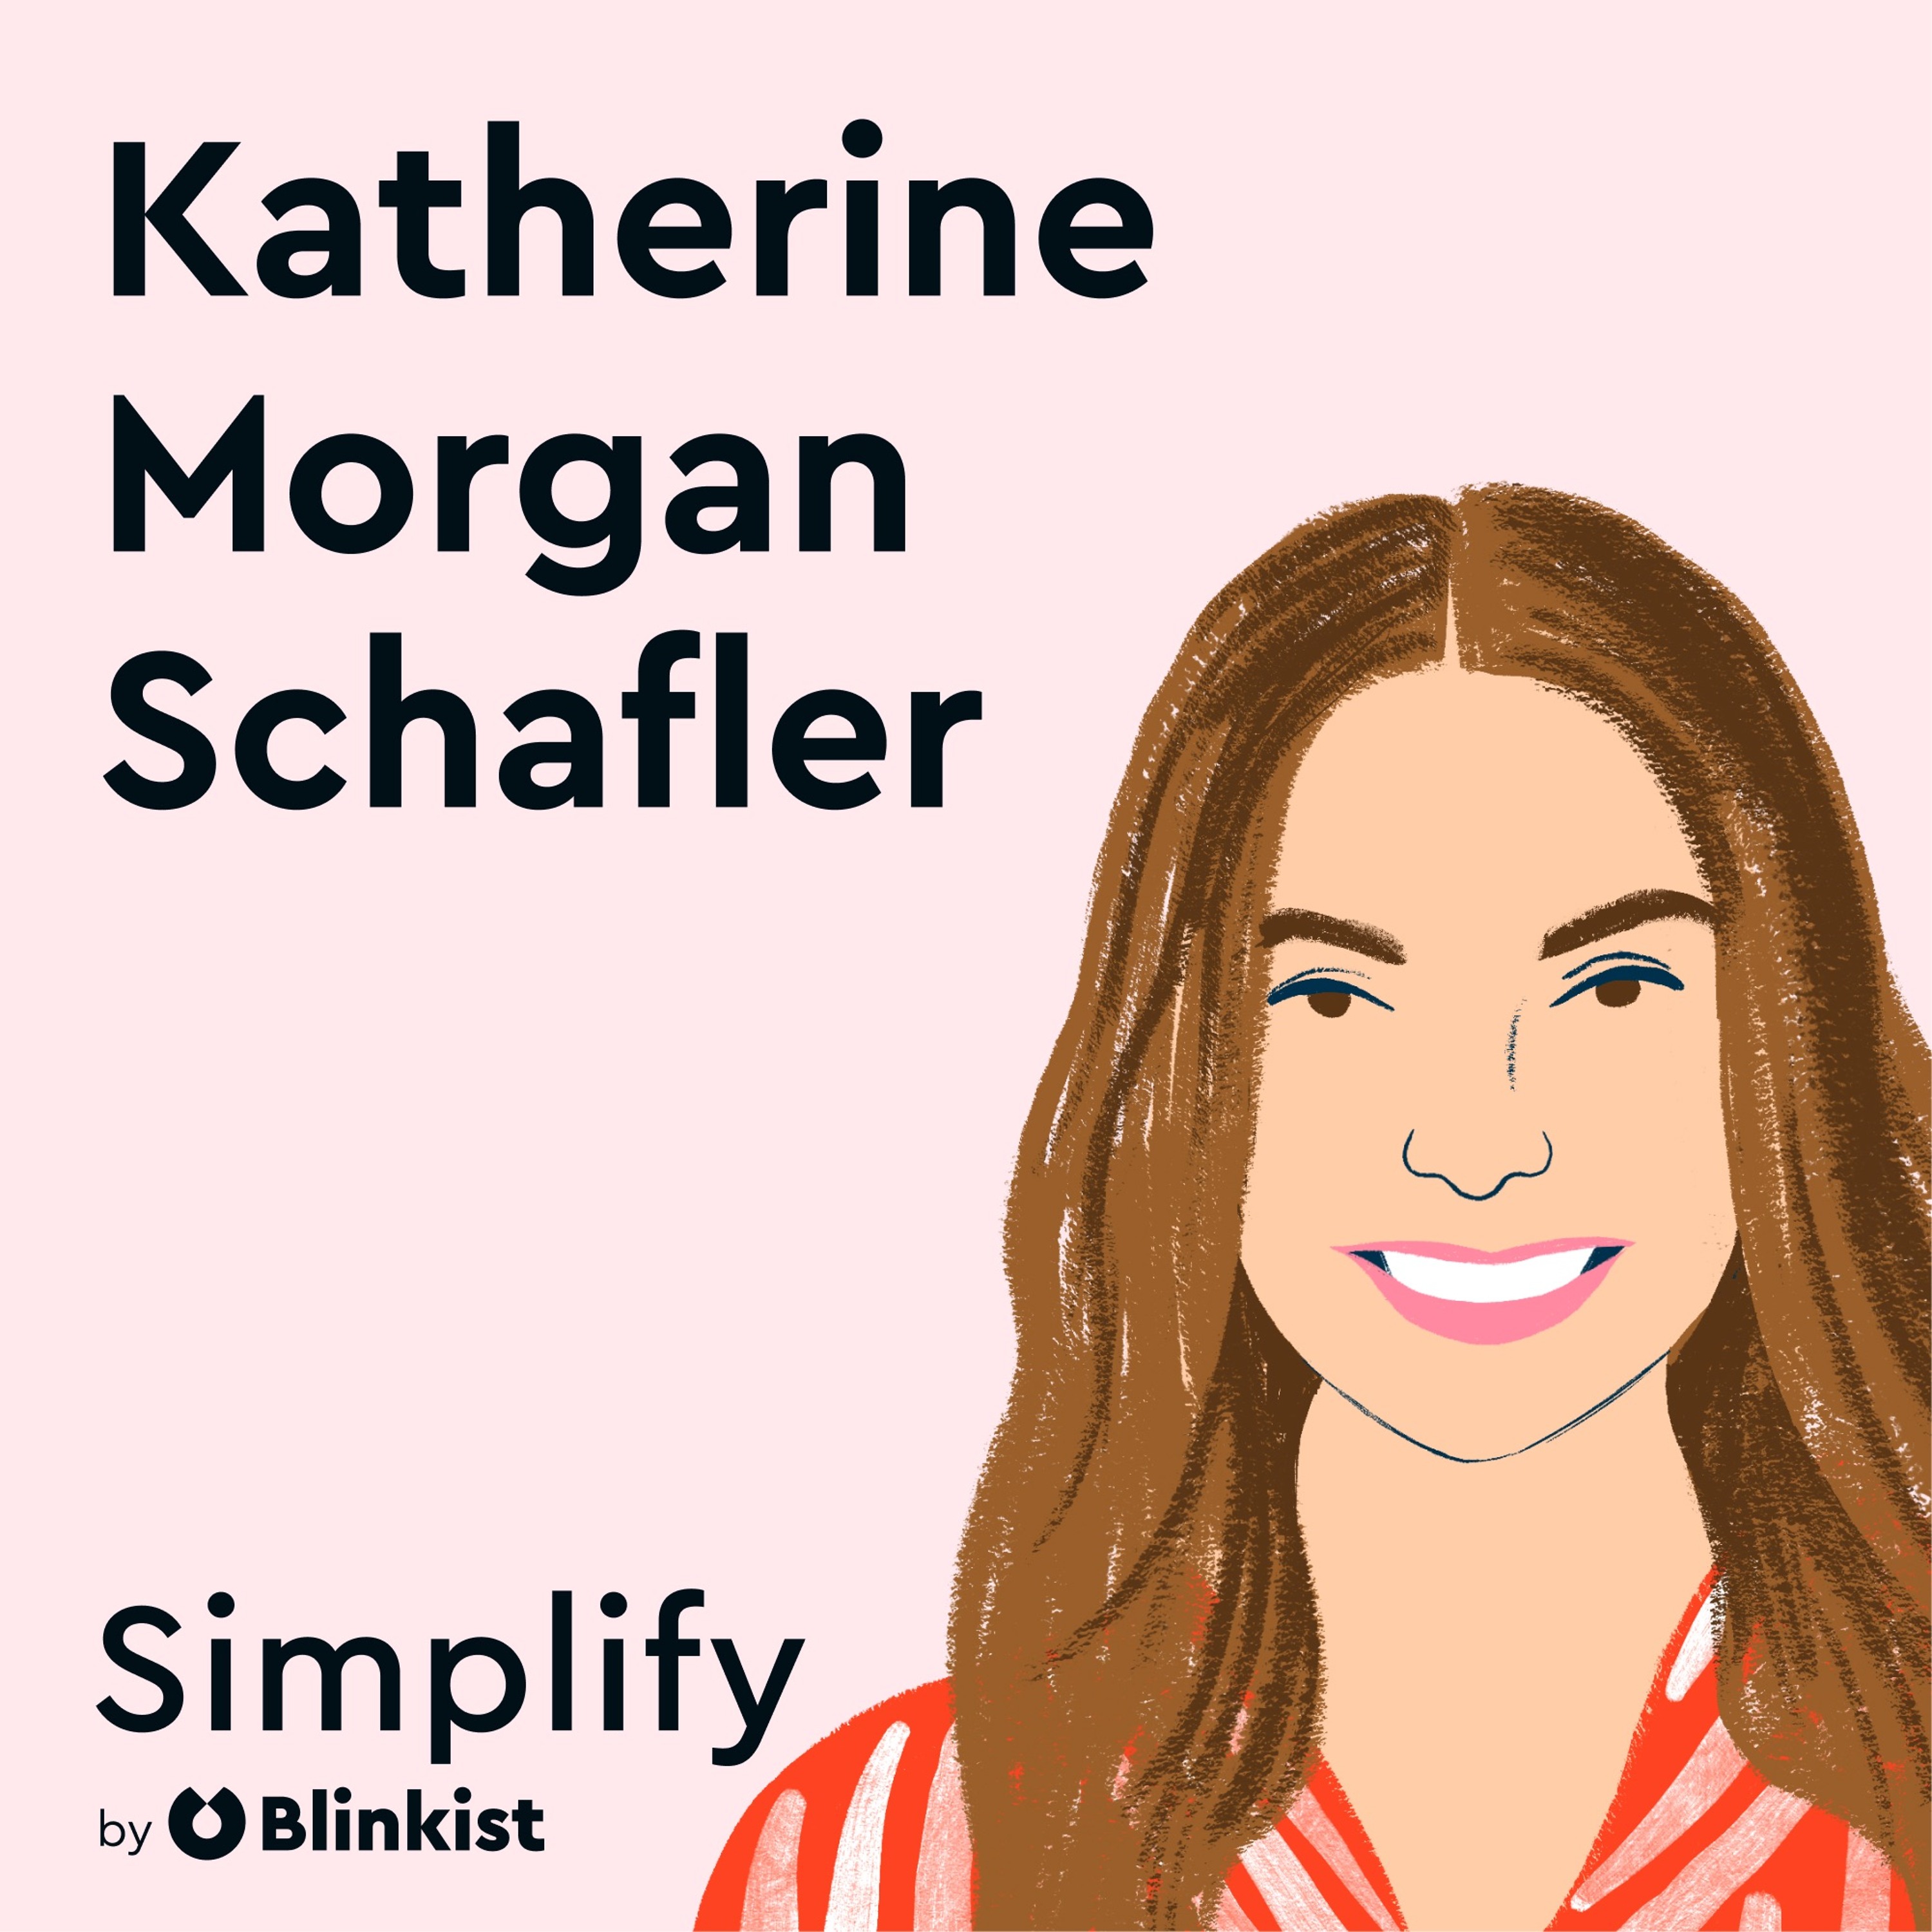 Katherine Morgan Schafler: Perfectionism is a Gift